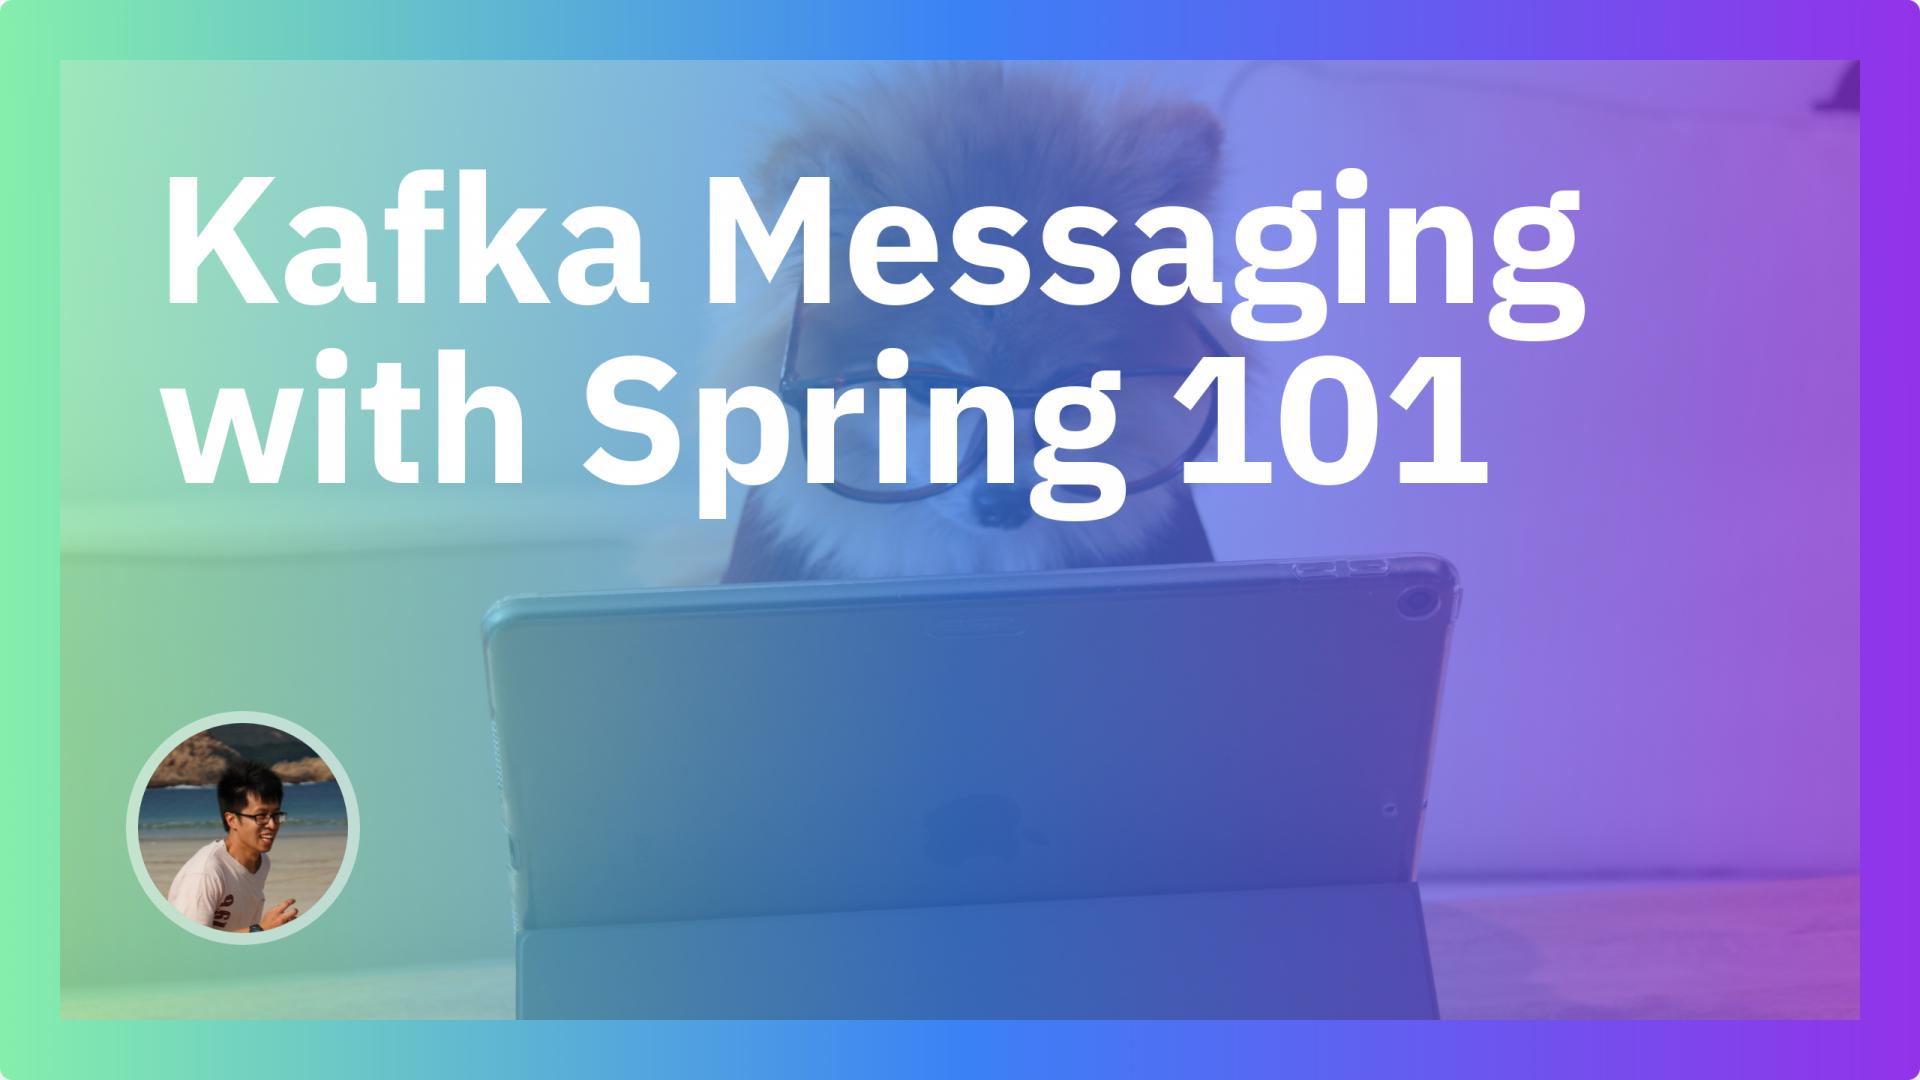 Kafka Messaging with Spring 101